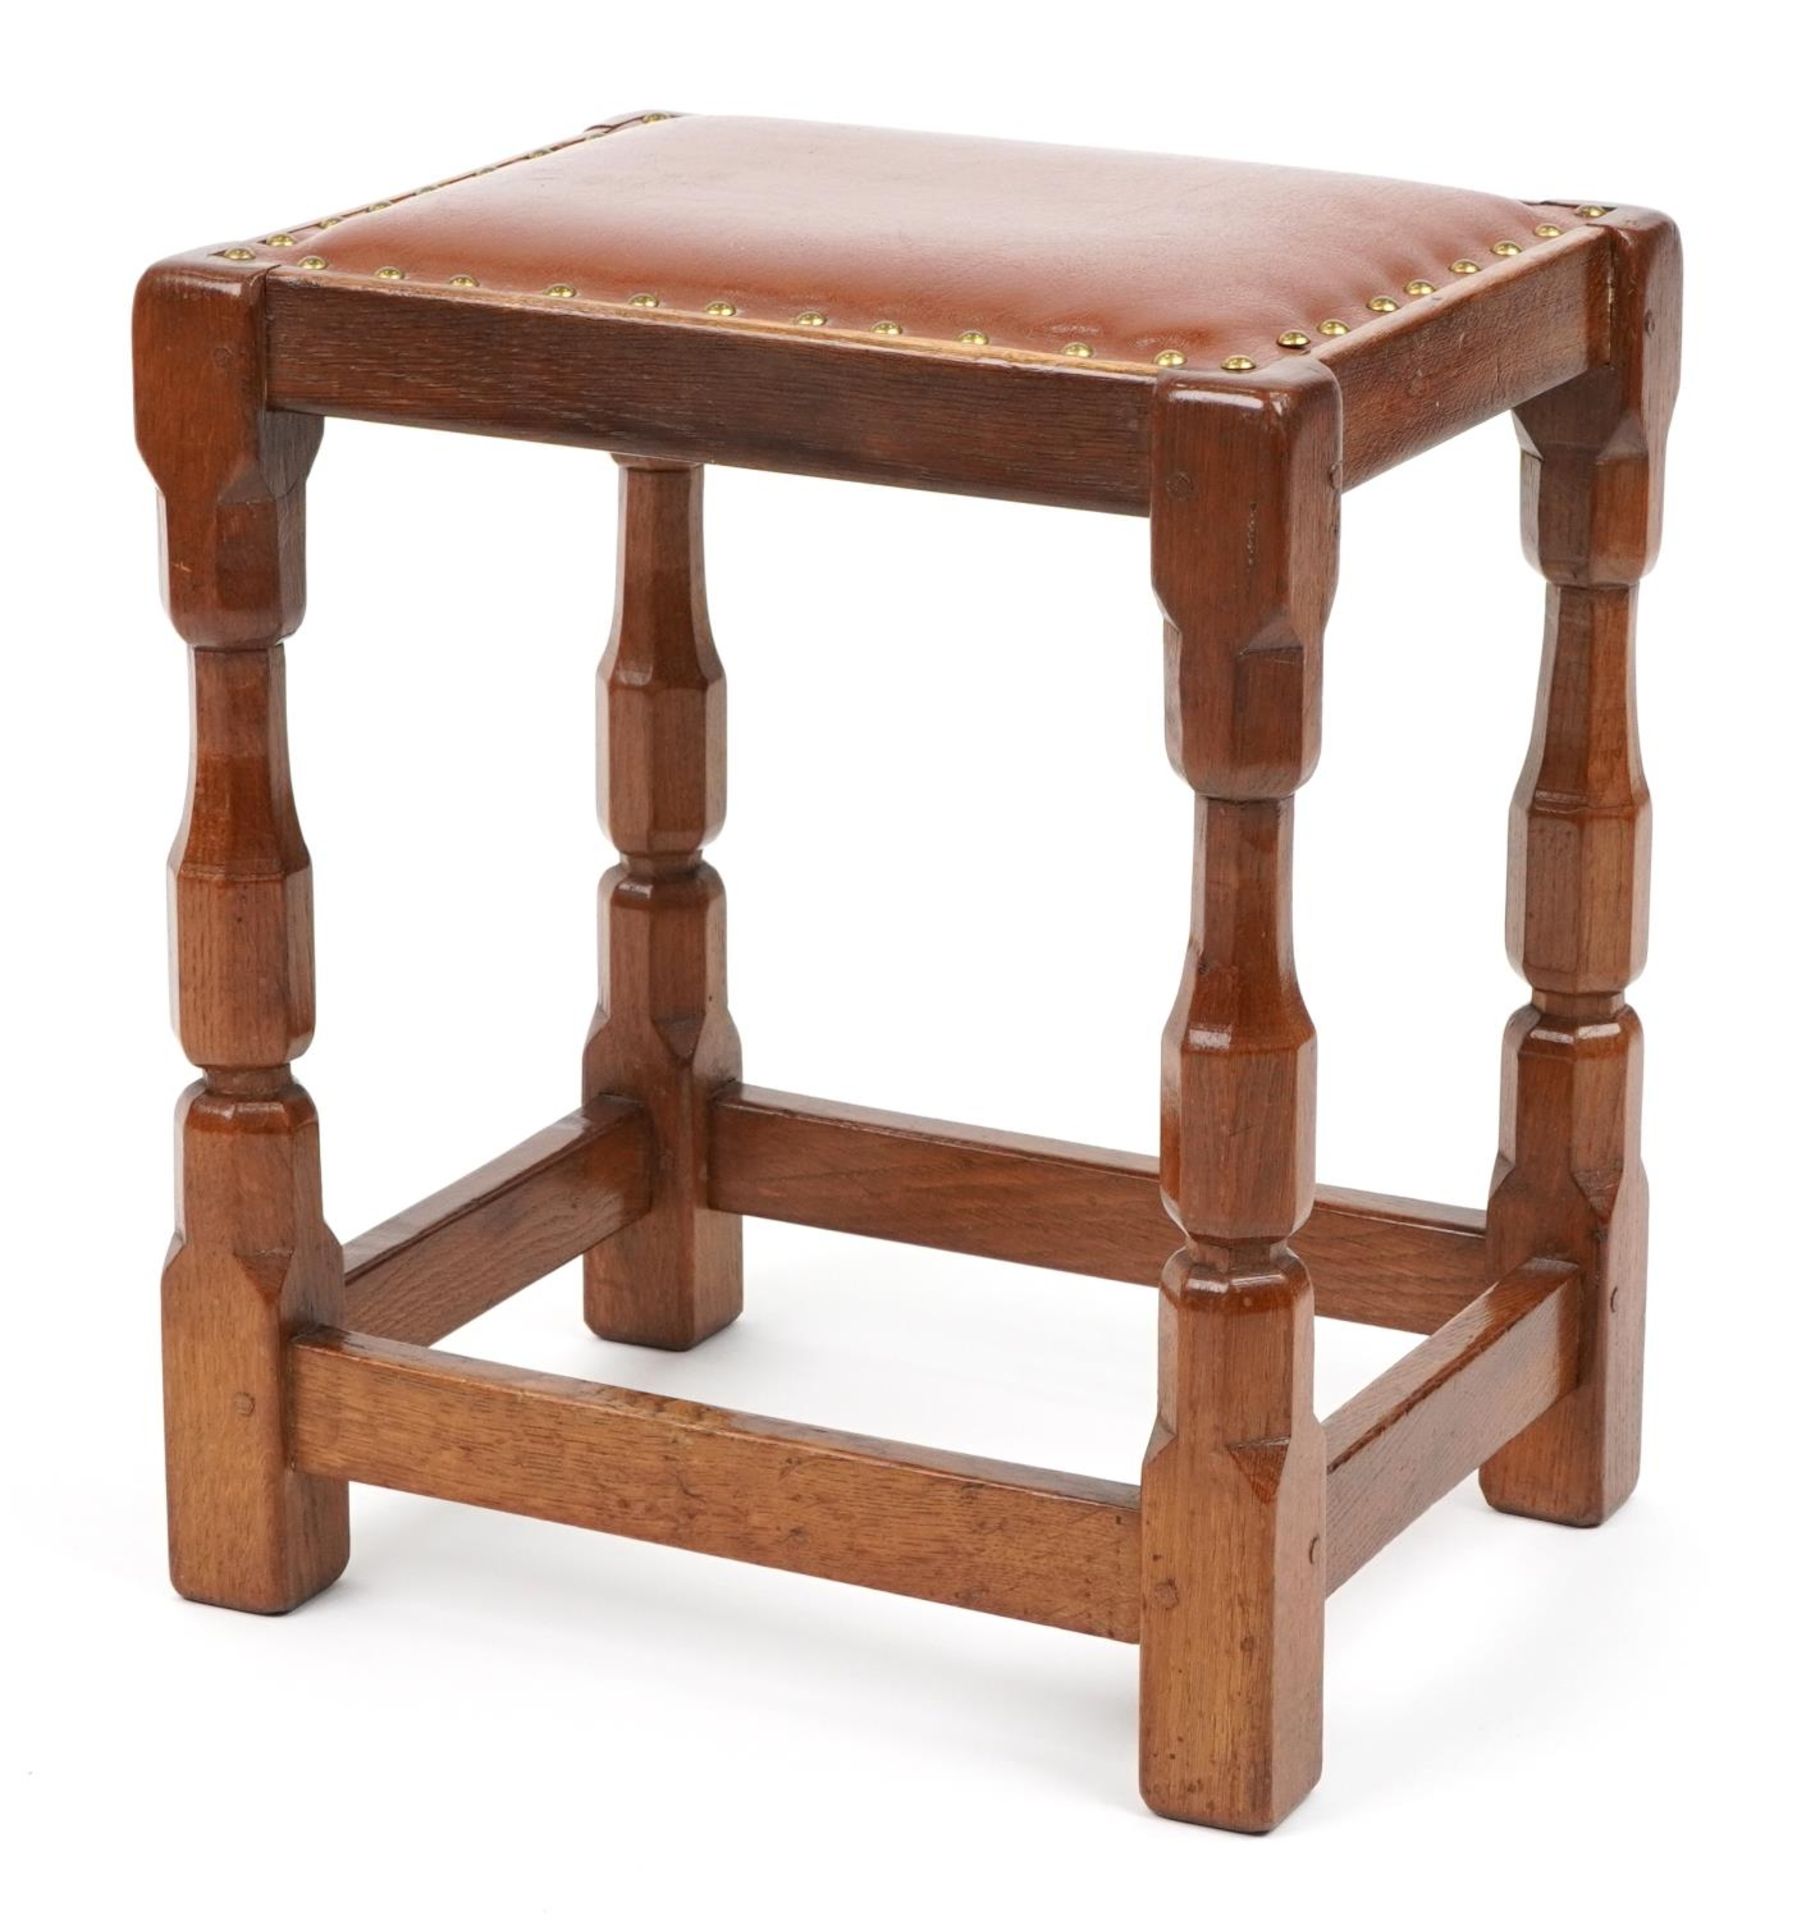 Syd Pollard, Arts & Crafts oak stool with brown leather upholstered seat, 45cm H x 40cm W x 32cm D : - Image 3 of 3